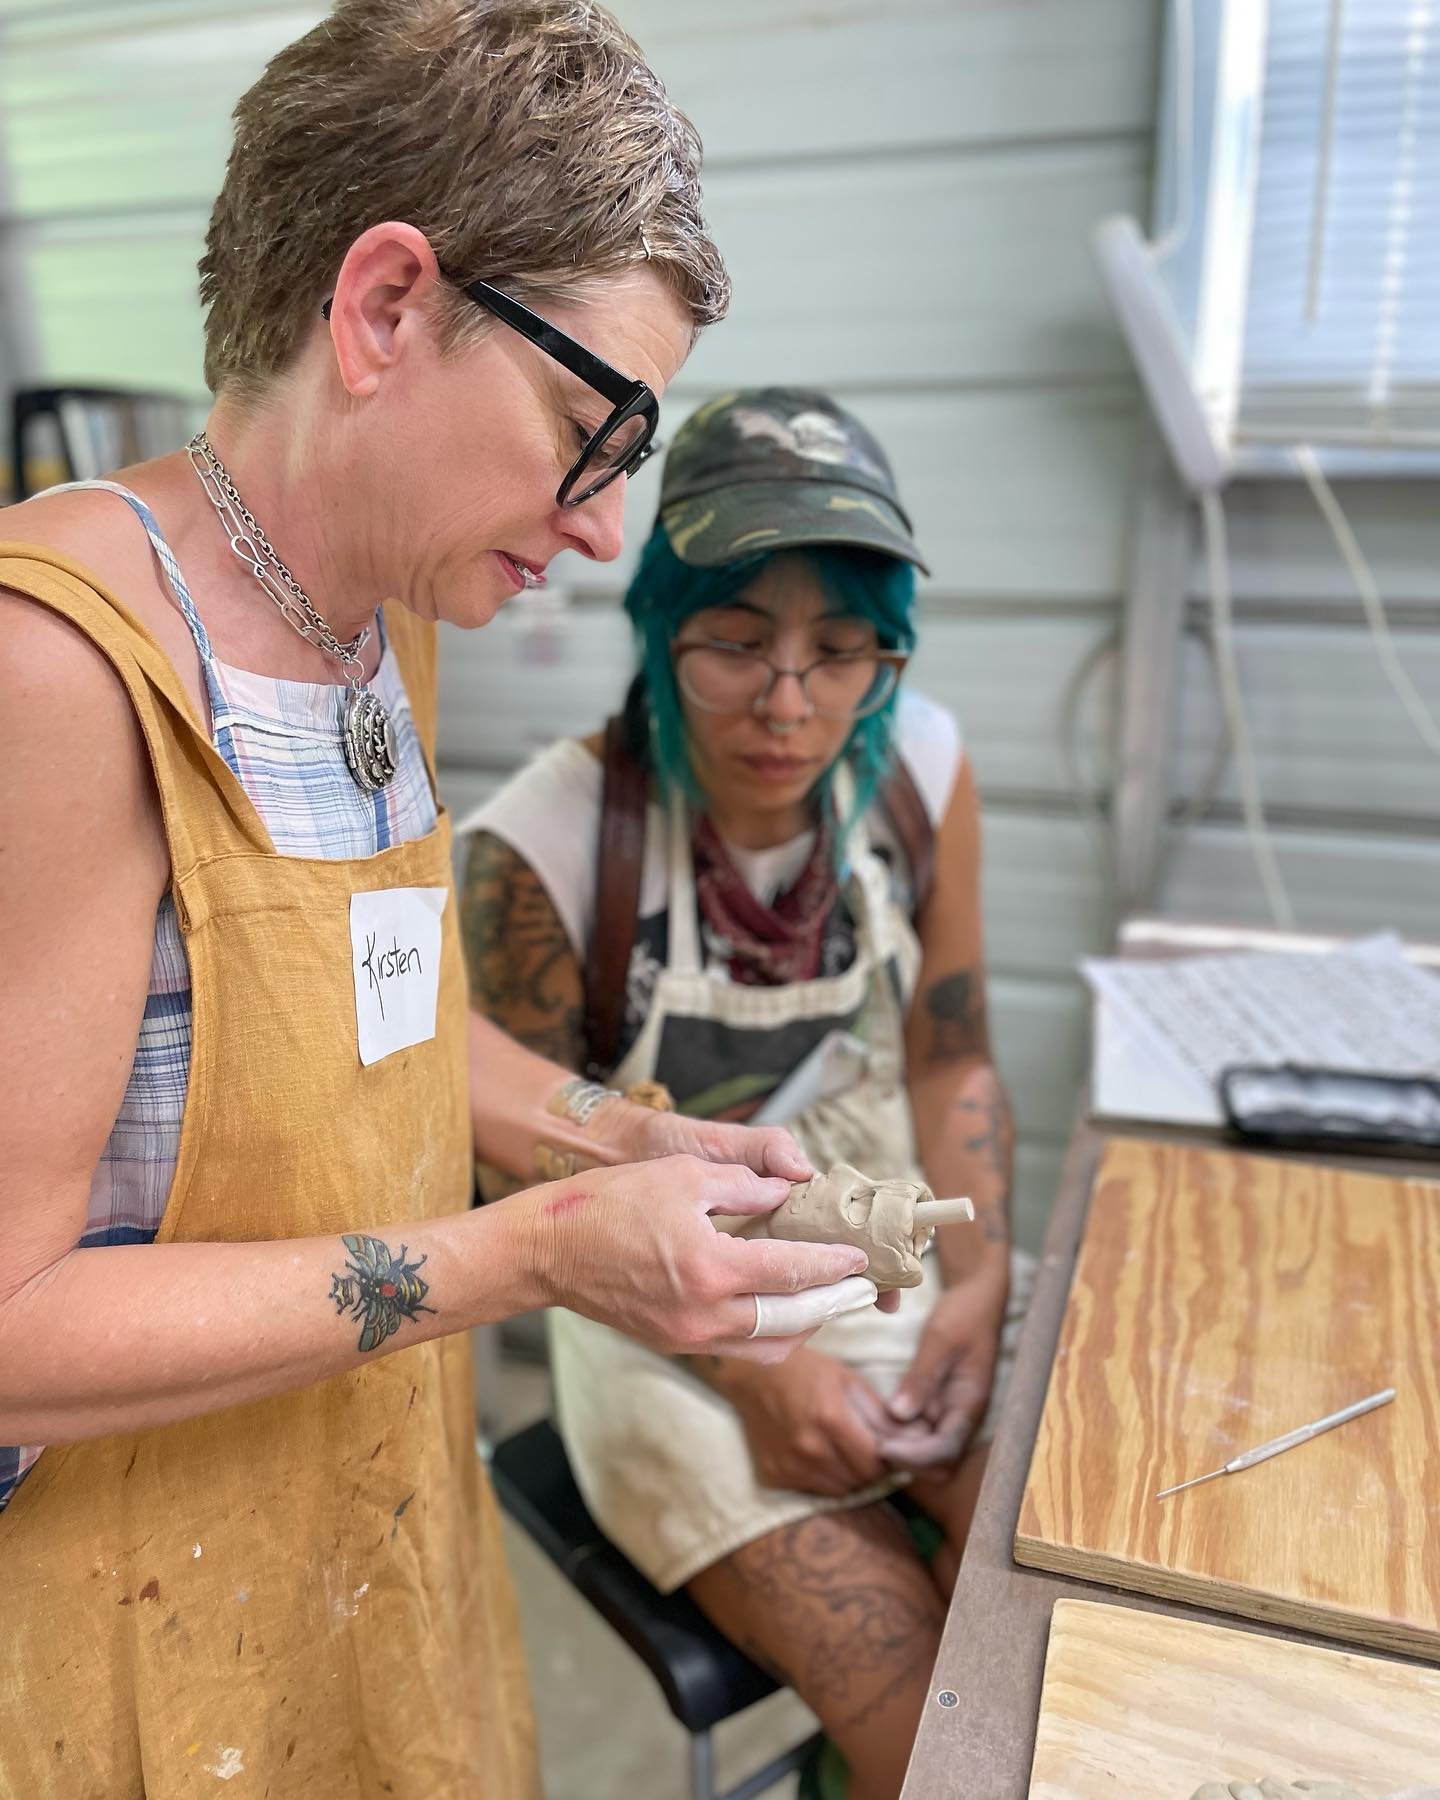 It&rsquo;s Day 1 of Kirsten Stingle&rsquo;s workshop &ldquo;Unearthing the Narrative&rdquo;🥰

We have a FULL class who are eager to learn👍

Check out all of our workshops at the LINK IN BIO

#ceramicsculpture #doubleislandstudio #kirstenstingle #ce